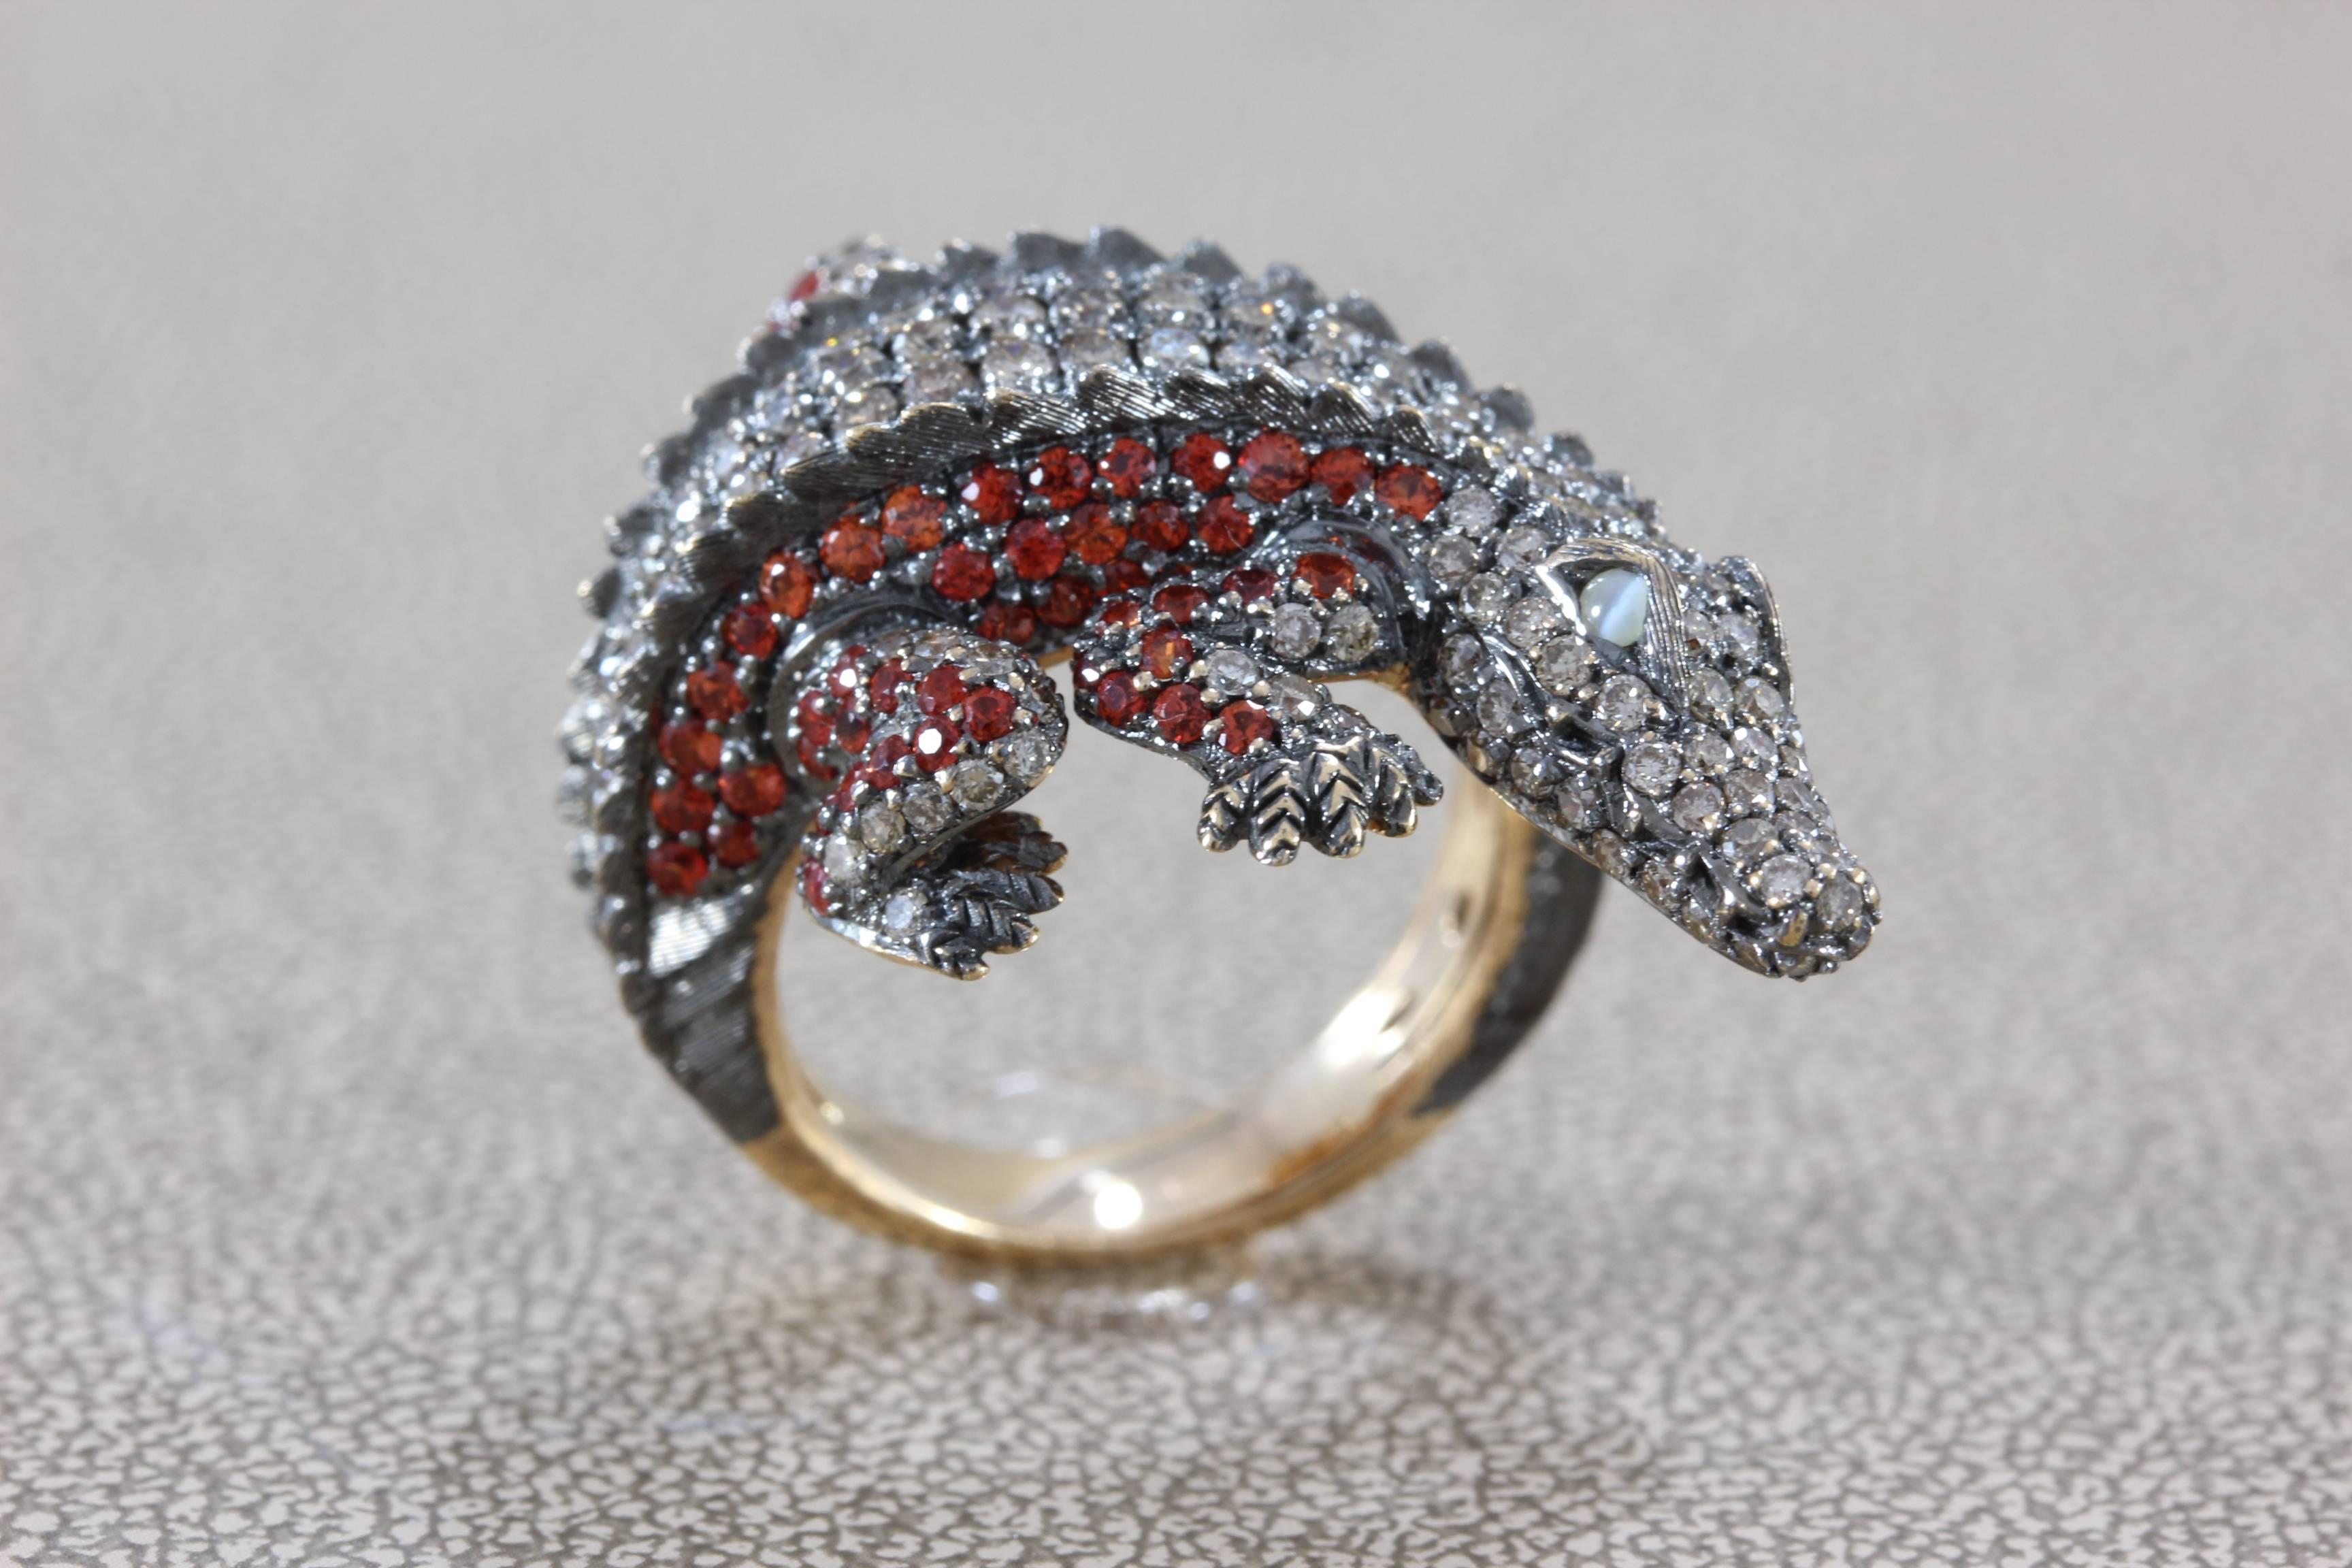 A spectacular fun and sexy gator ring featuring fancy colored diamonds and orange sapphire set in 18K gold. The eyes of this fearsome creature are cat eyes with strong bands that move in the light bringing the piece to life.

Dimensions: 1.25 x 1.00